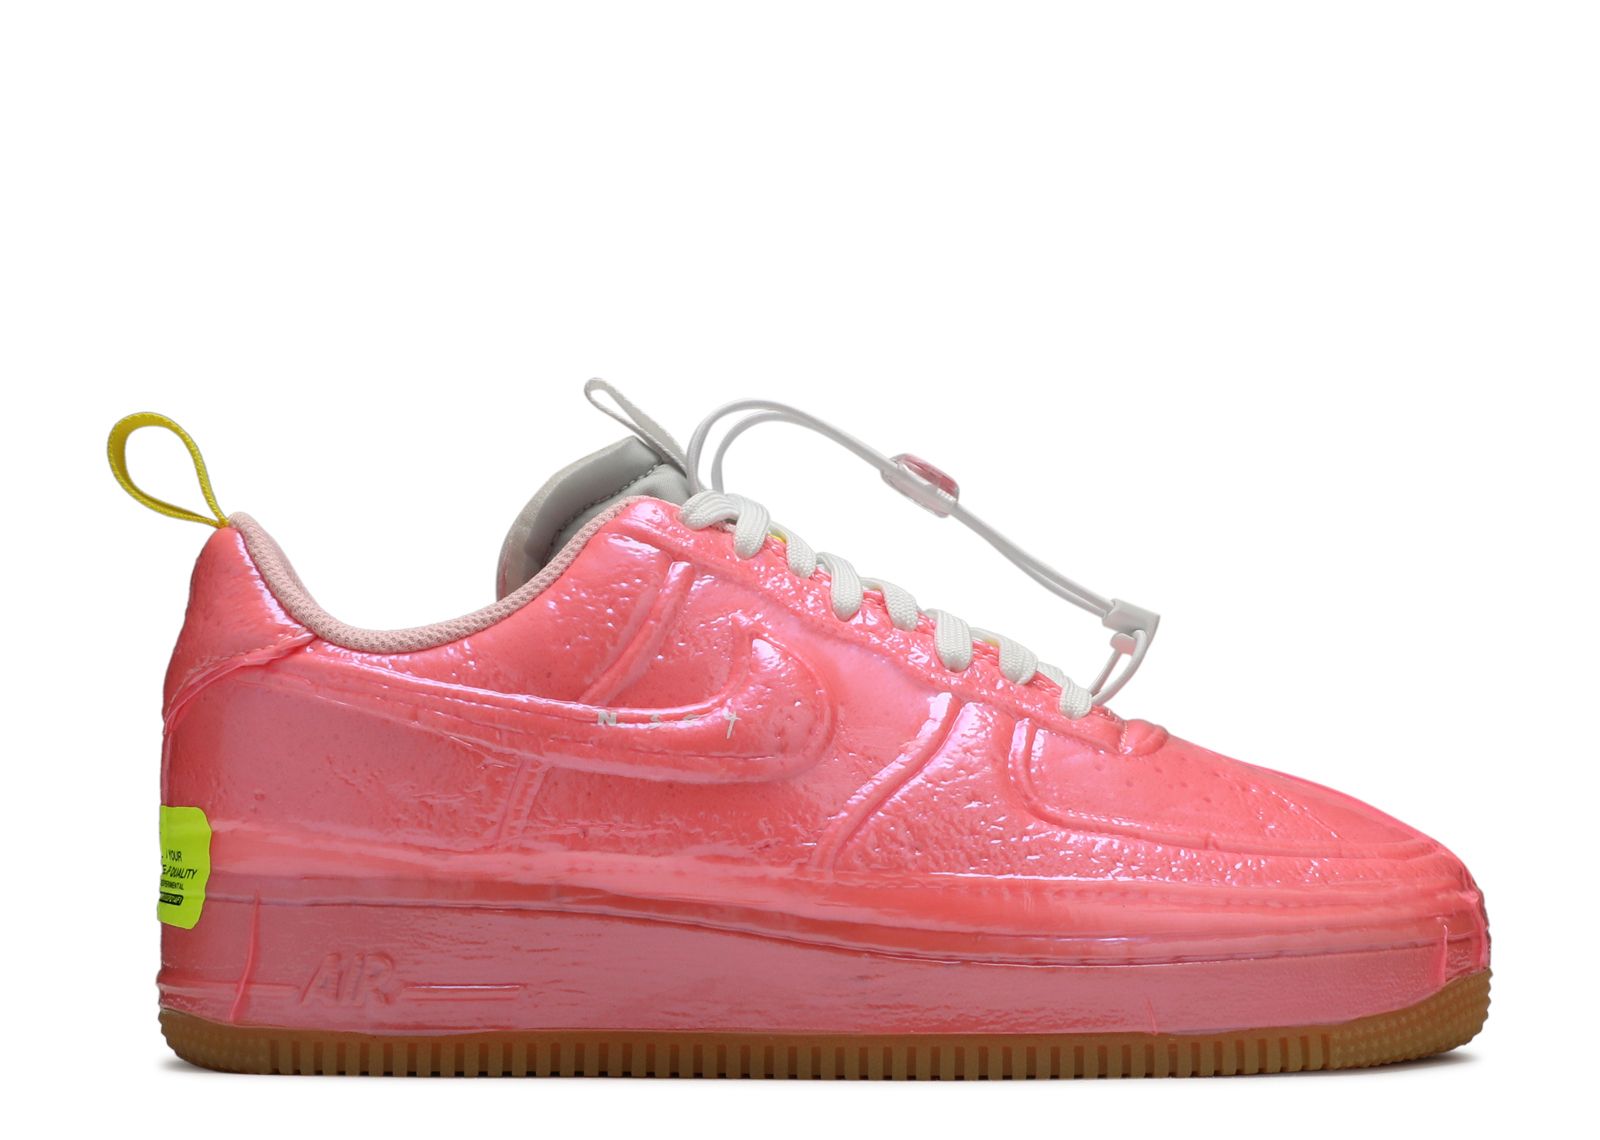 air force pink